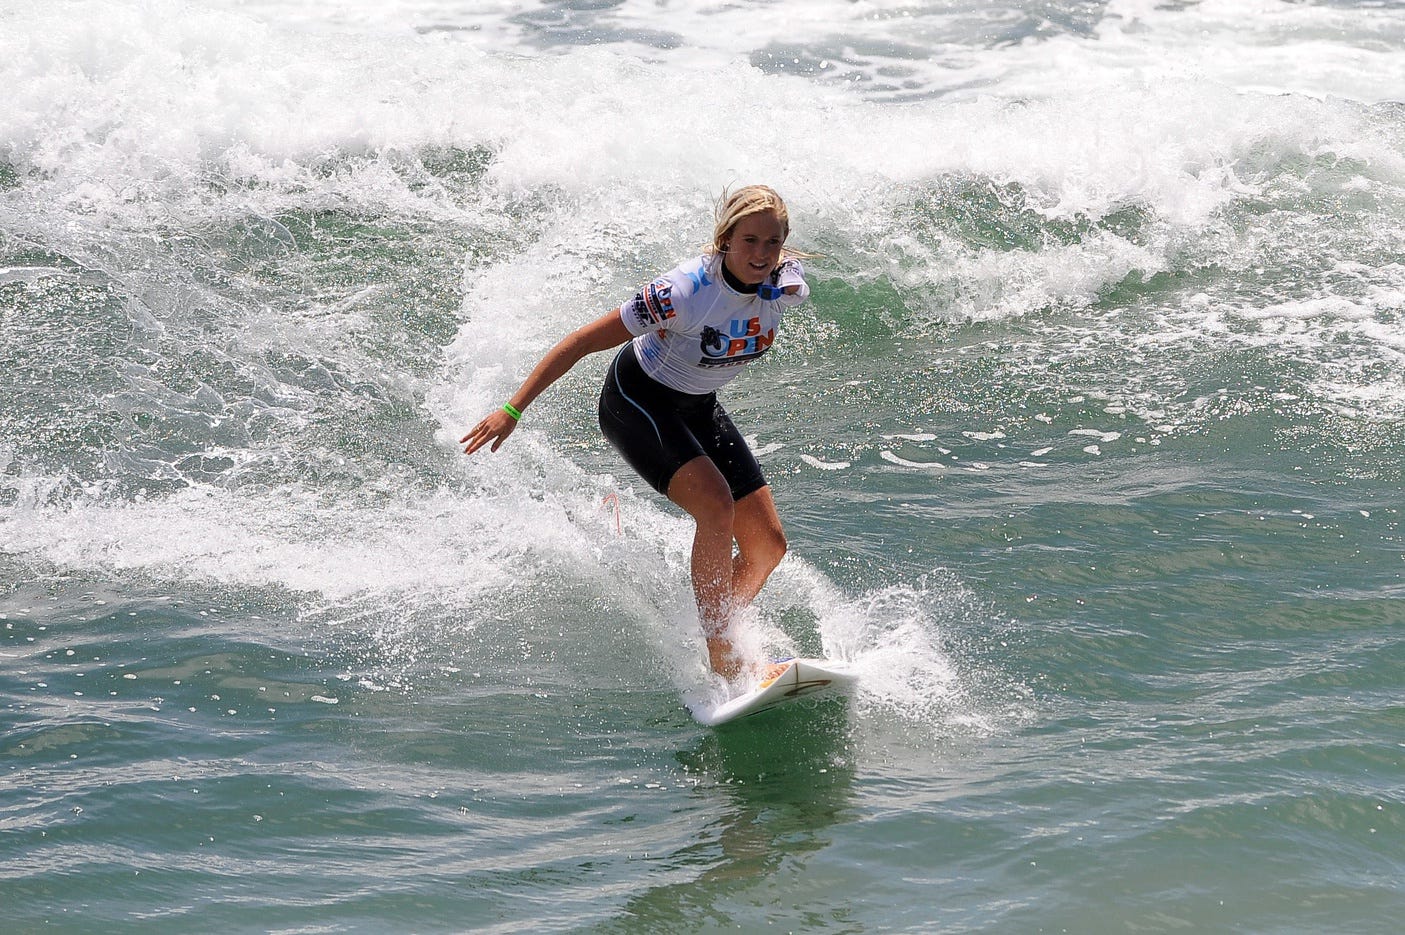 Surfer Bethany Hamilton says she won't compete if WSL's new transgender guidelines are enacted